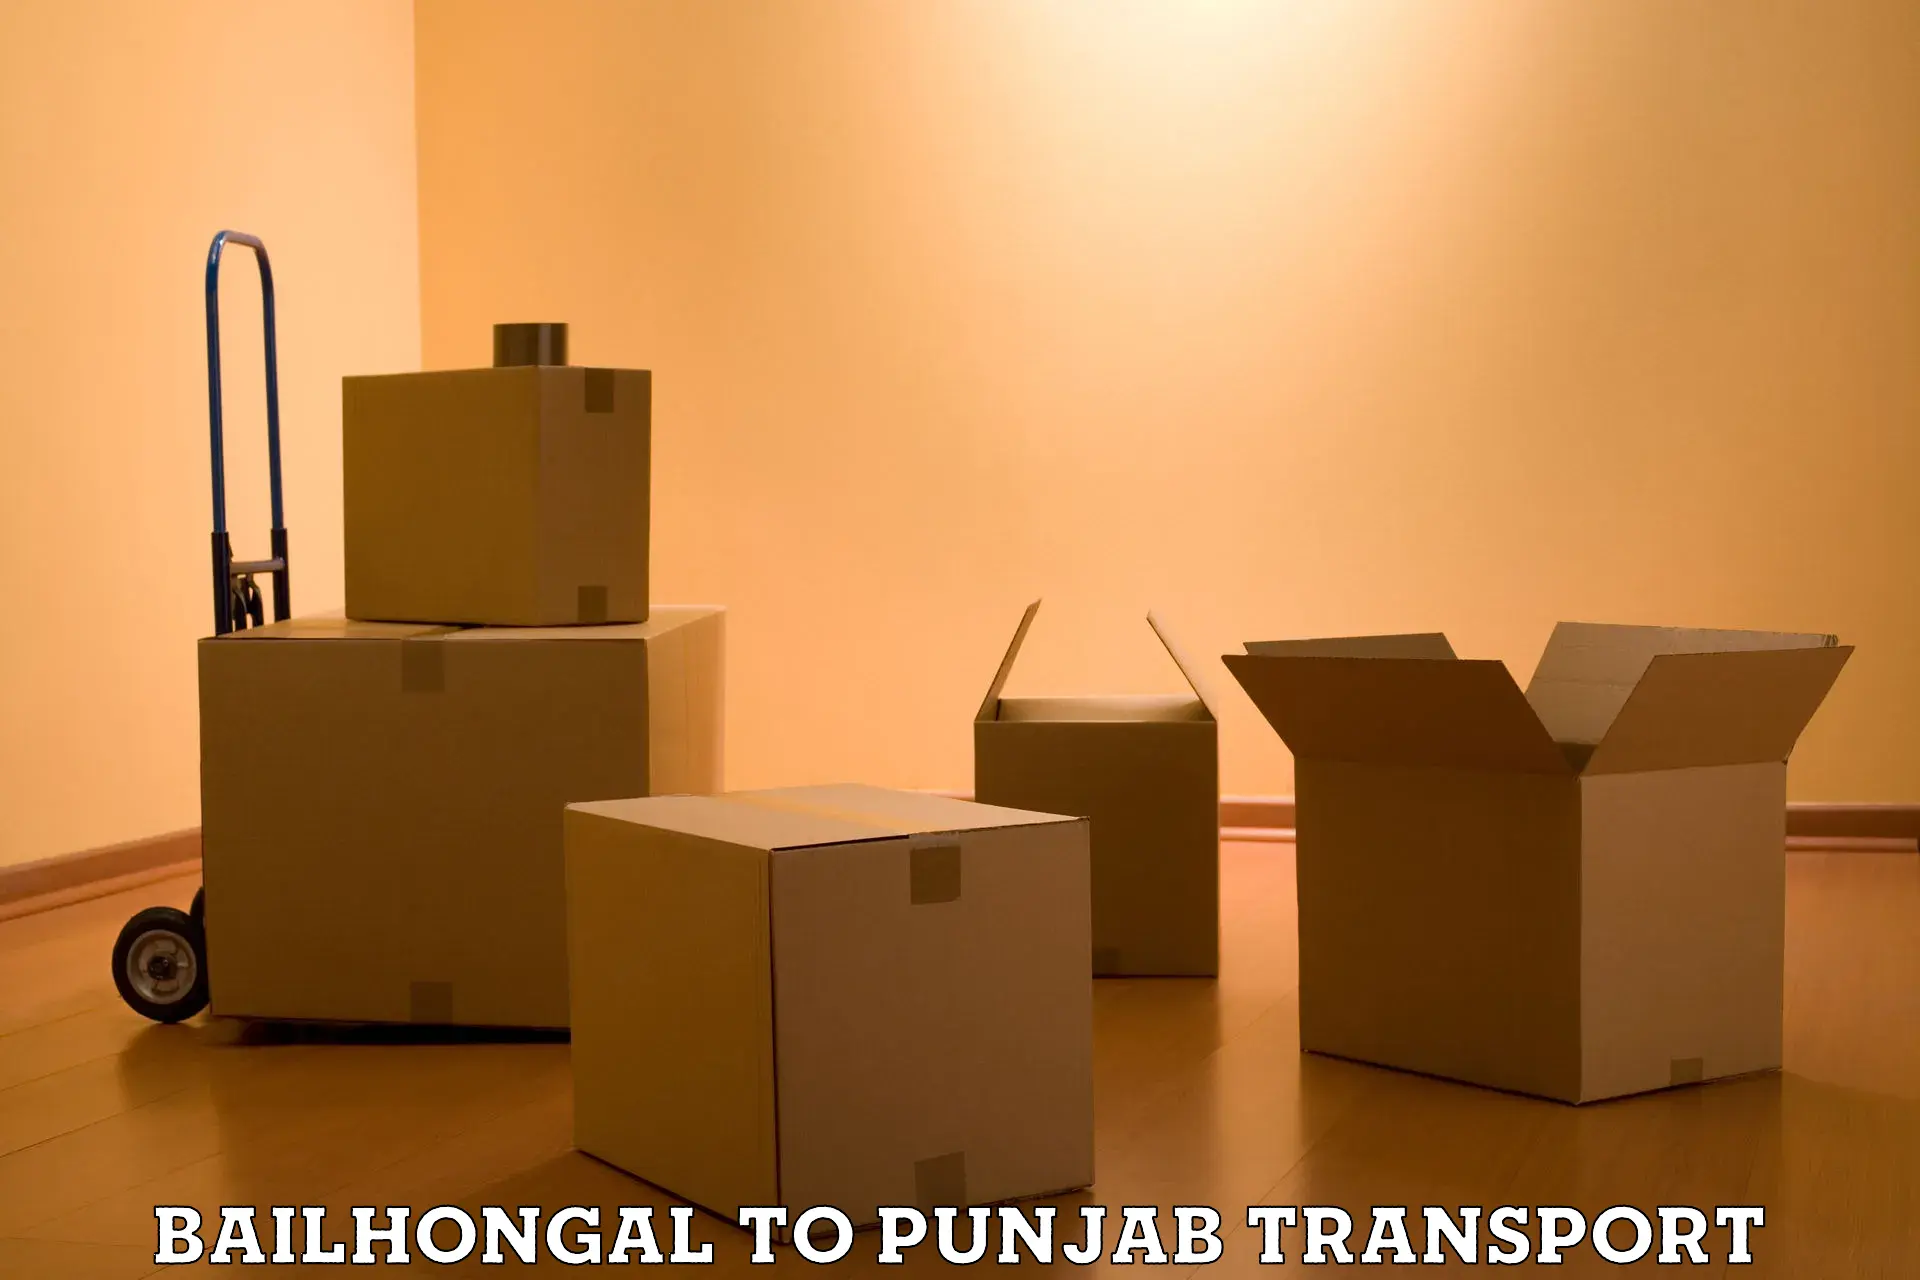 Nationwide transport services Bailhongal to Bagha Purana